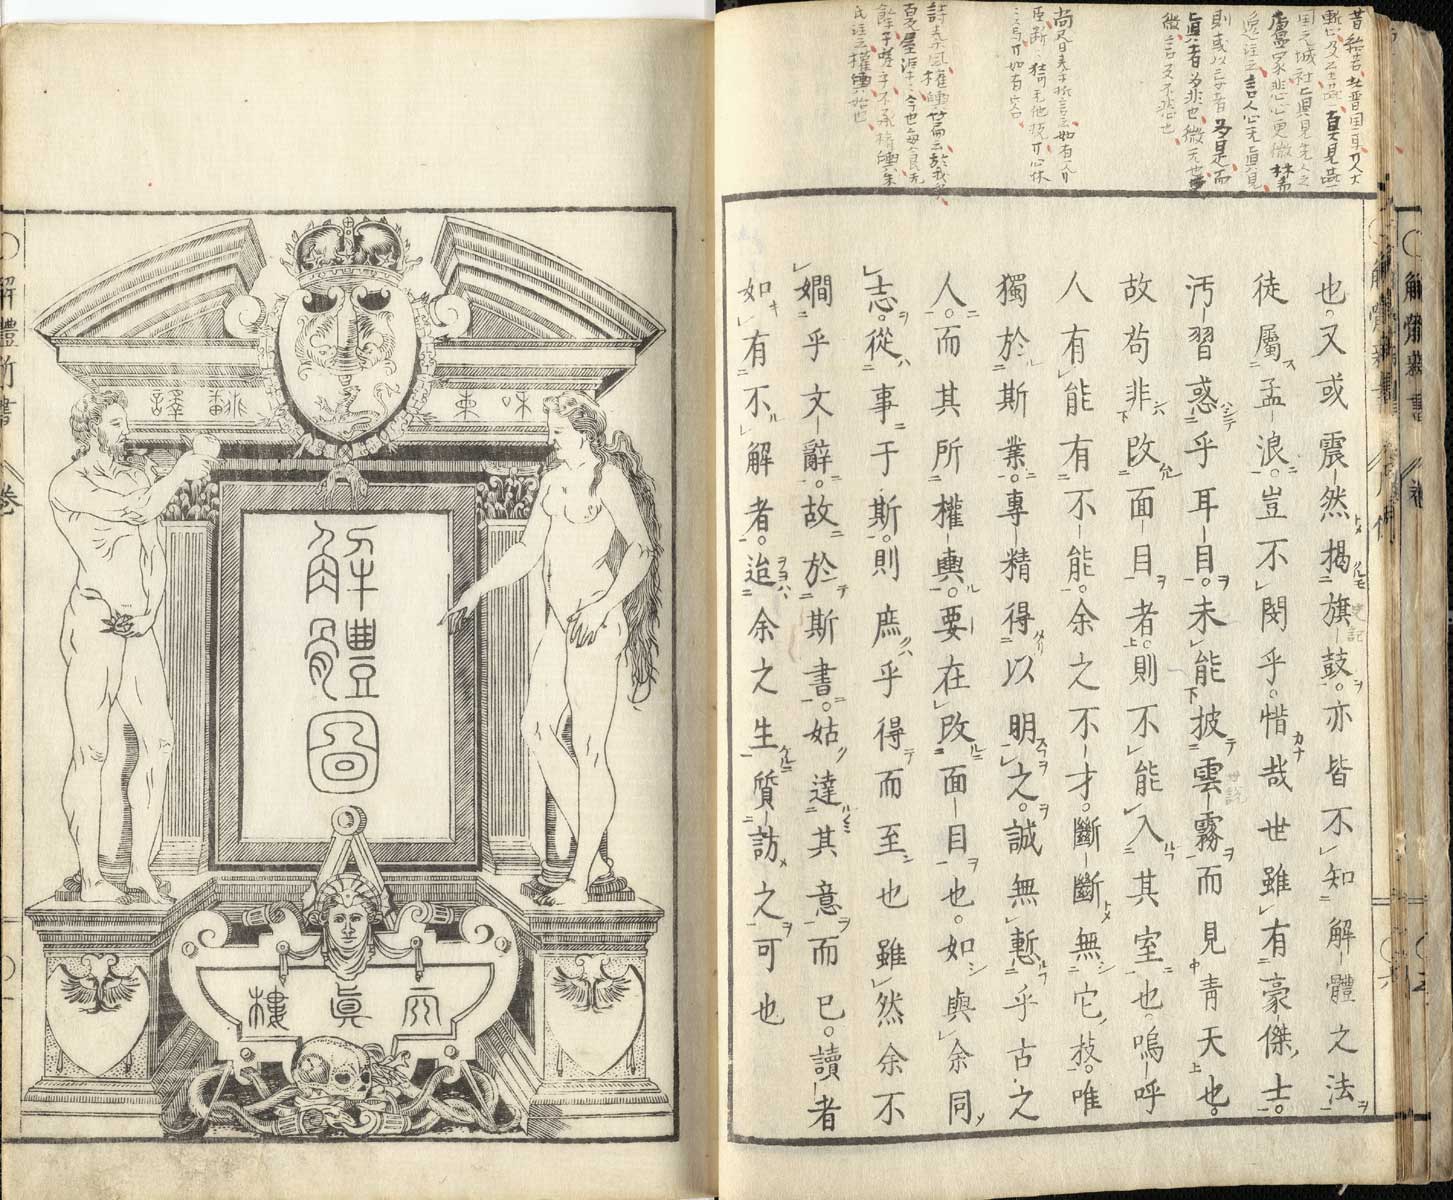 Johann Adam Kulmus' Kaitai shinsho, featuring on the left page an illustration of the titlepage of the frontispiece of A. Vesalii en Valverda Anatomie by Juan Valverde de Amusco published in Amsterdam in 1647. On the right side is page 1 of the shukan.